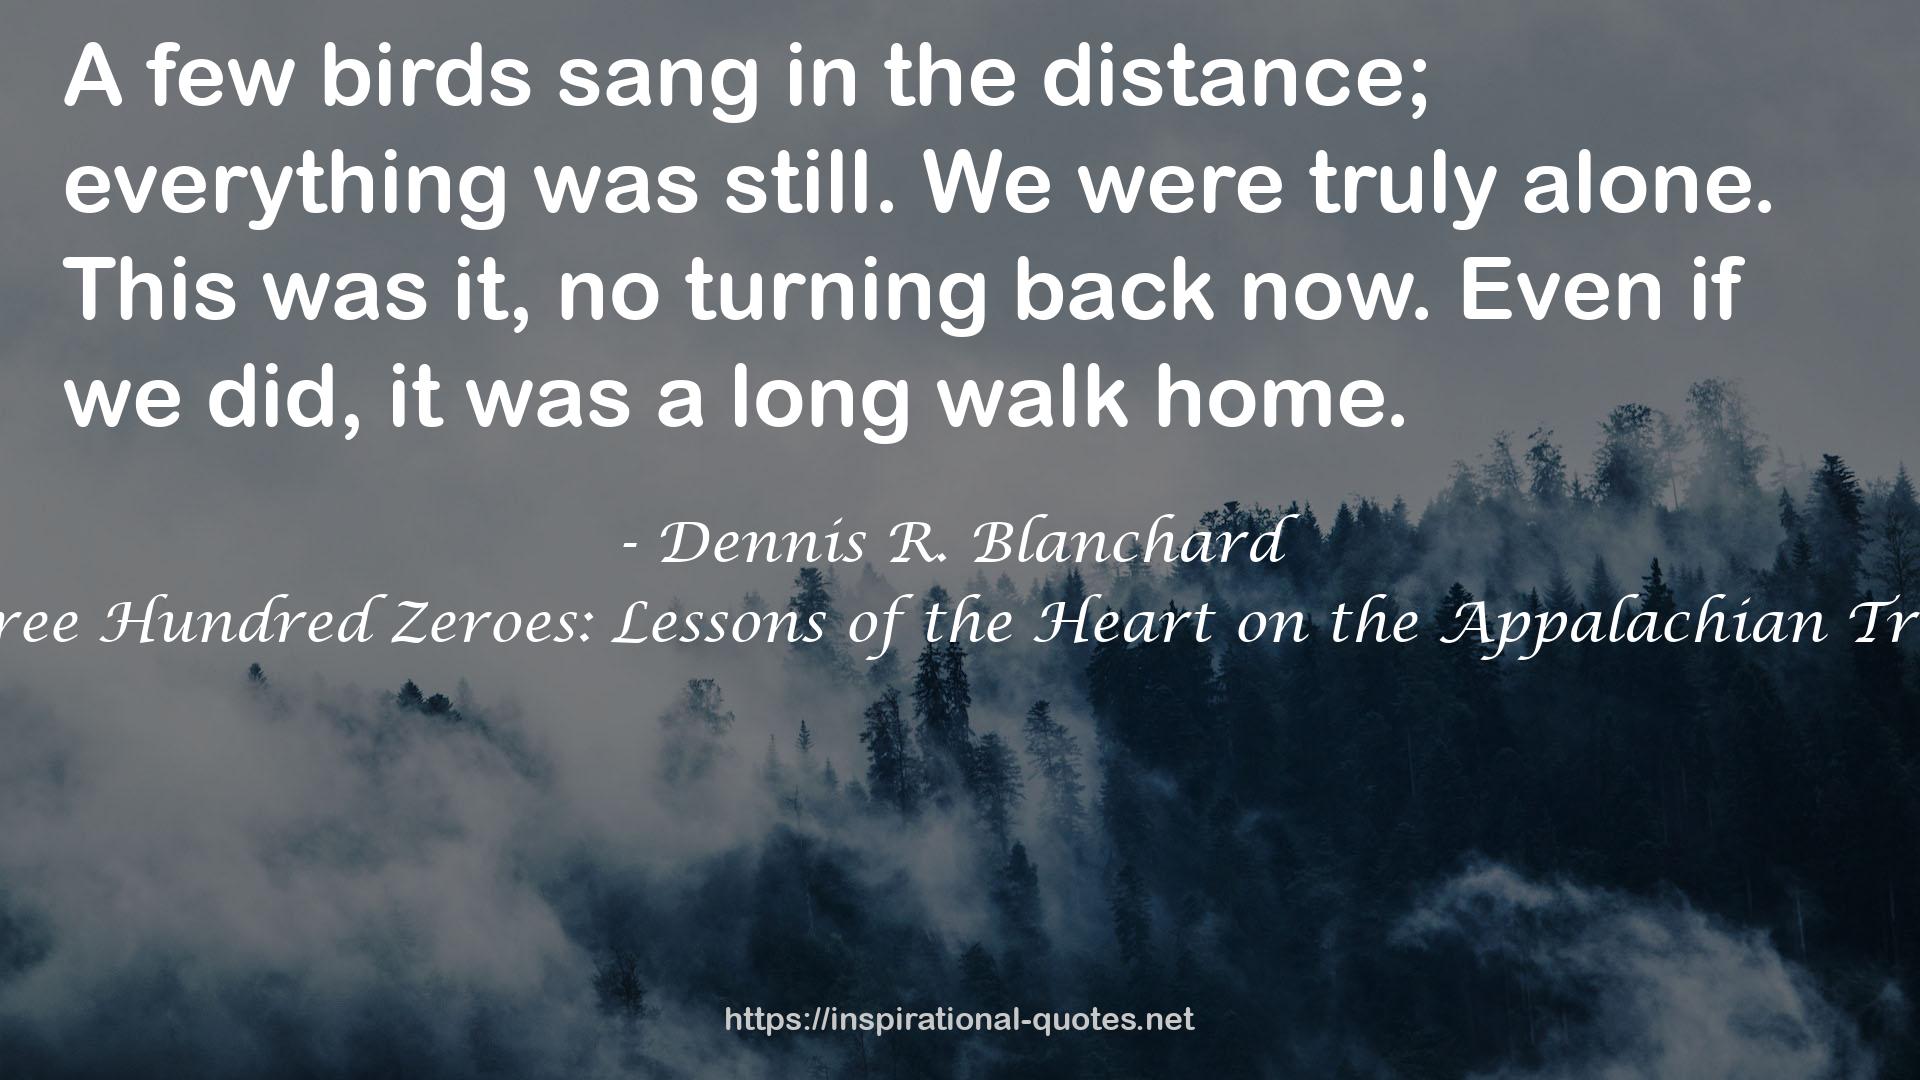 Three Hundred Zeroes: Lessons of the Heart on the Appalachian Trail QUOTES